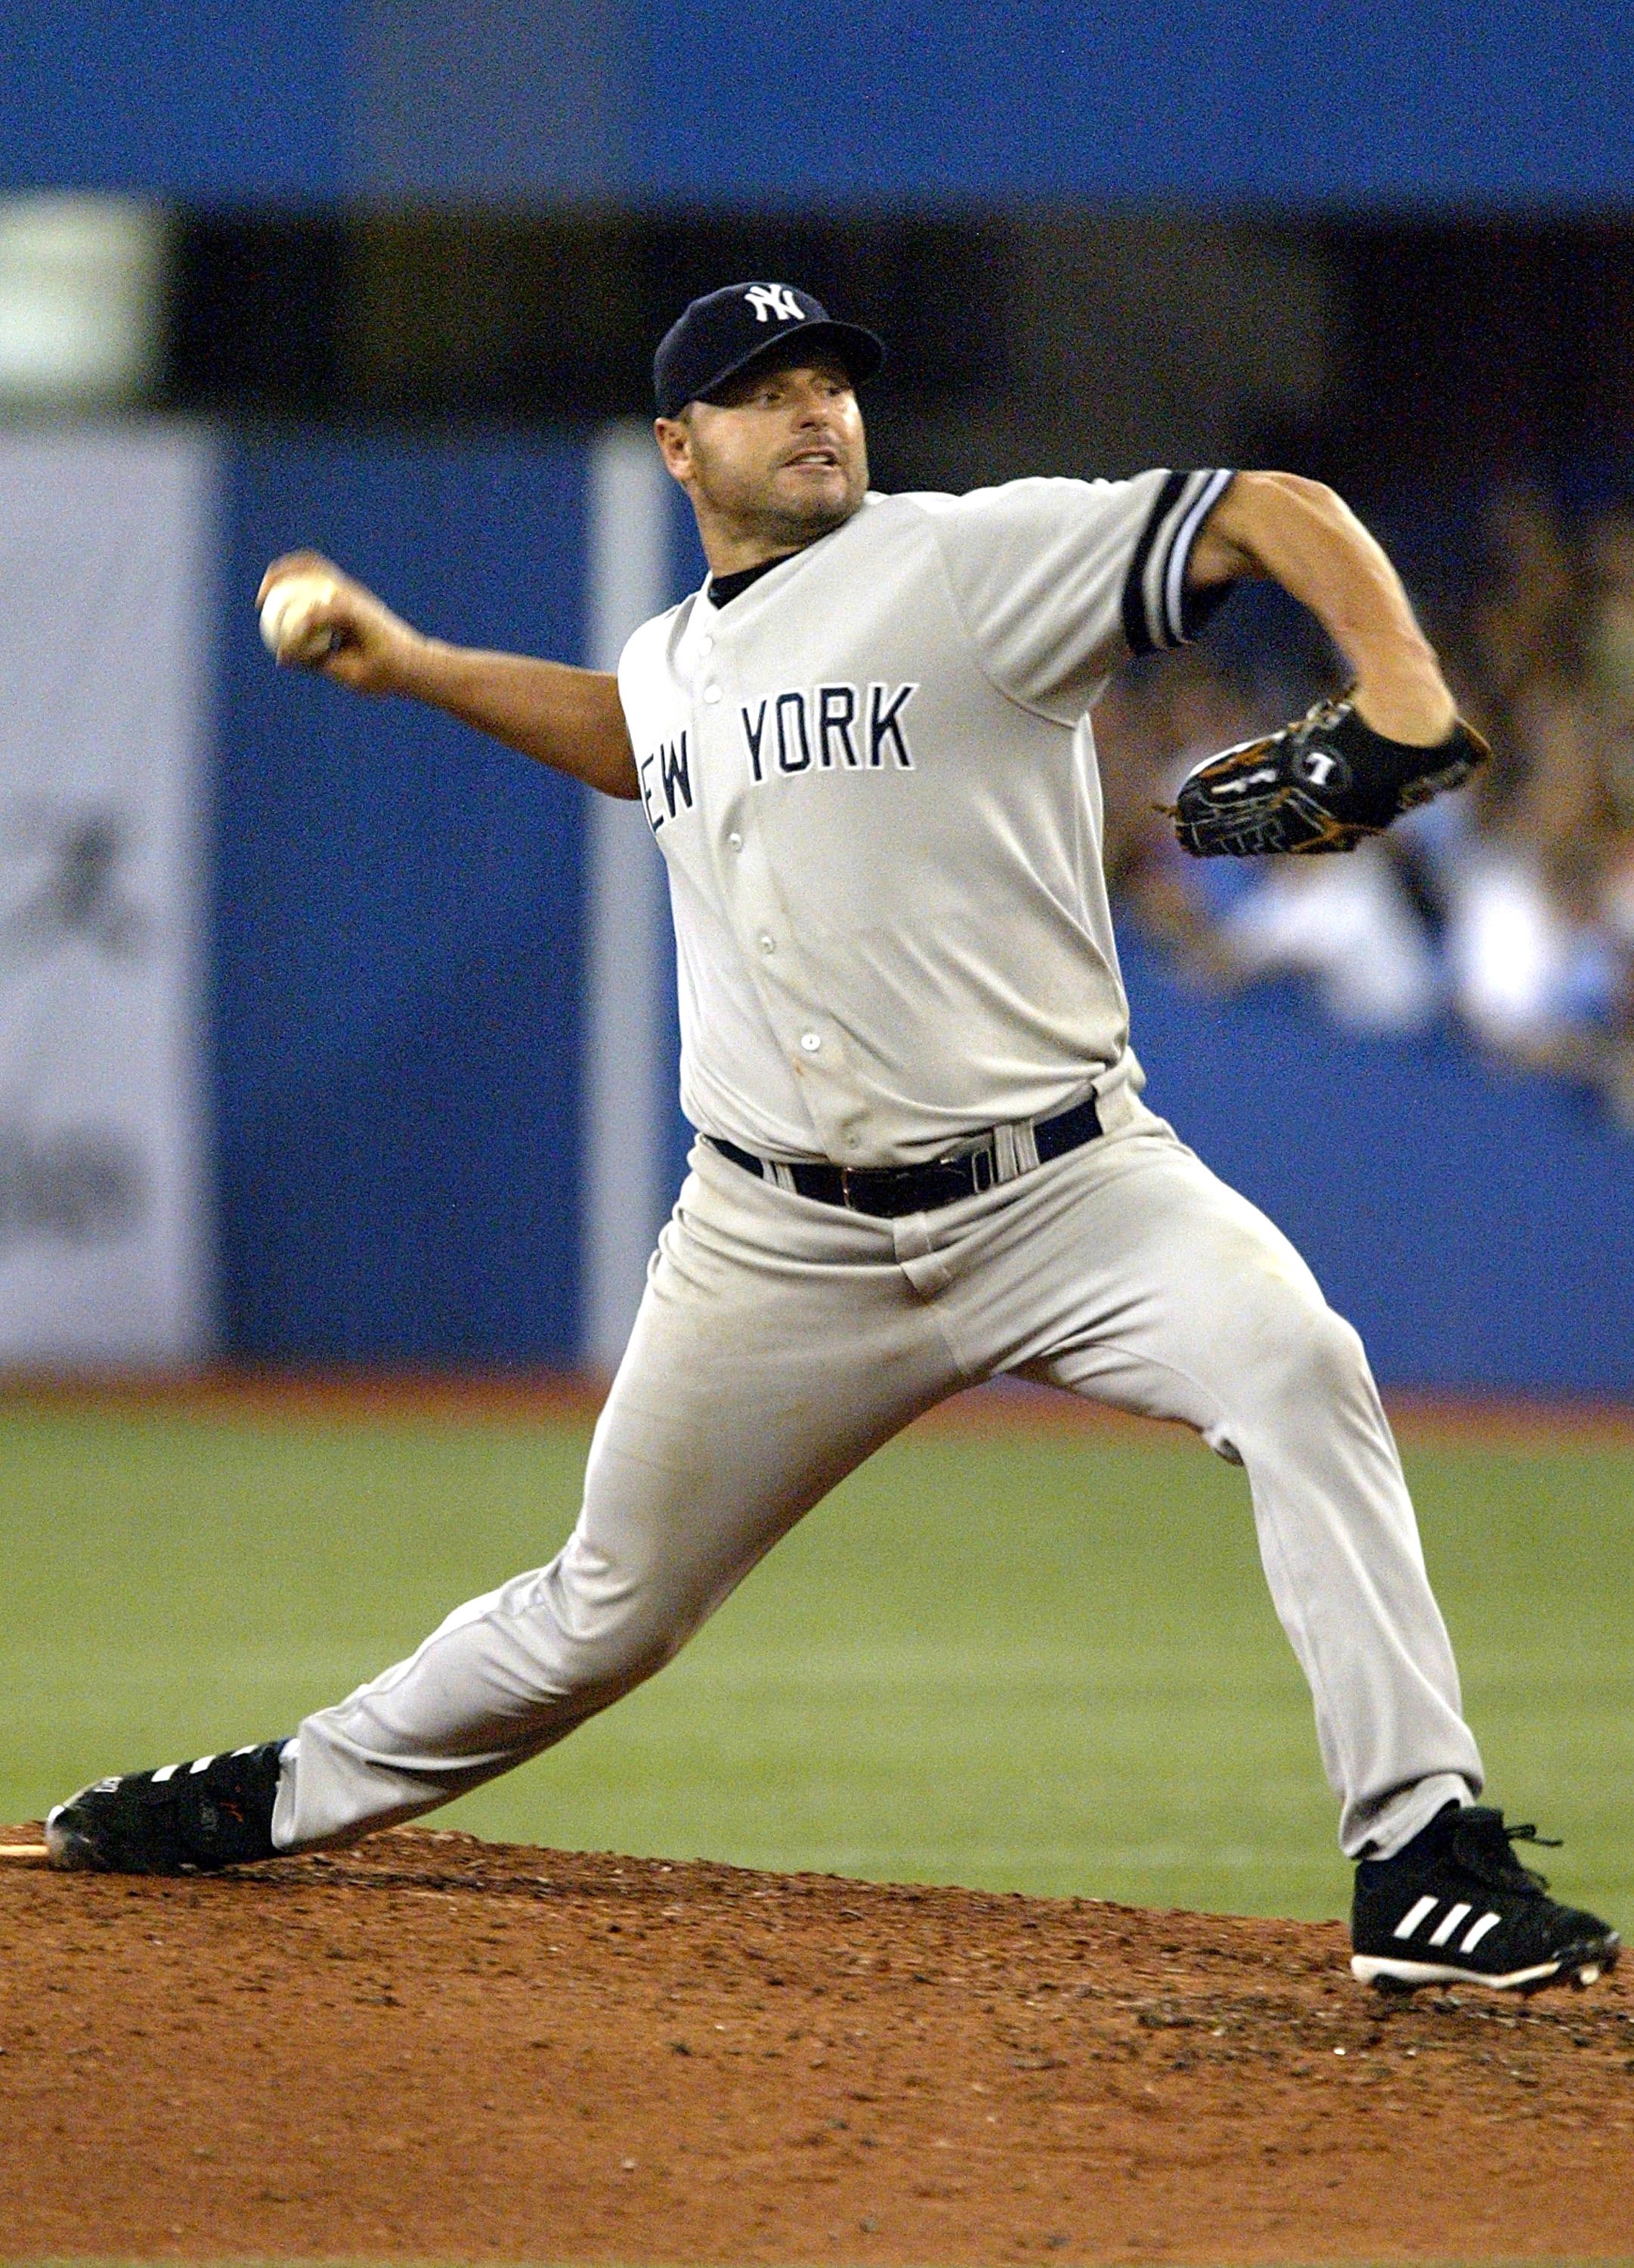 TORONTO - AUGUST 7:  Roger Clemens #22 of the New York Yankees throws a pitch against the Toronto Blue Jays on August 7, 2007 at the Rogers Centre in Toronto, Ontario, Canada. The Yankees defeated the Blue Jays 9-2.  (Photo by Dave Sandford/Getty Images)